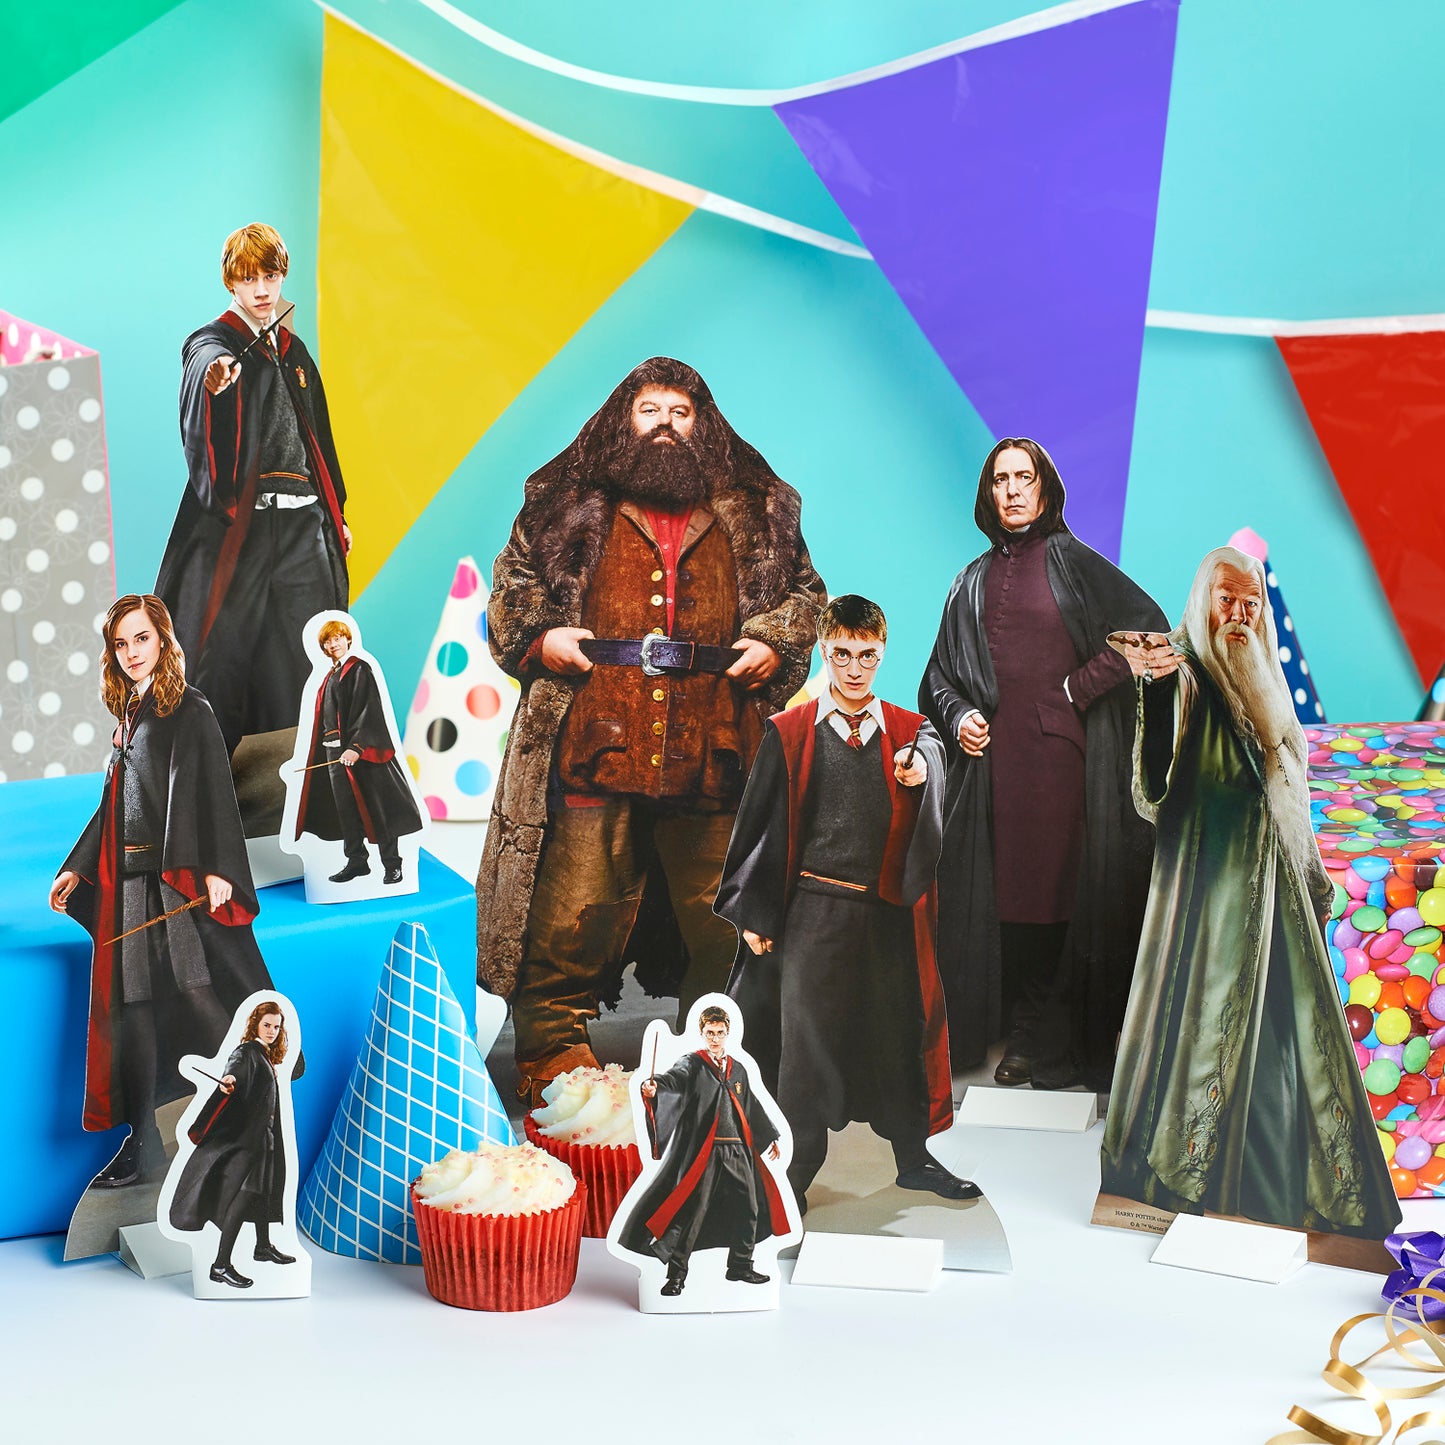 TT008 Wizarding World of Harry Potter Table Toppers Pack